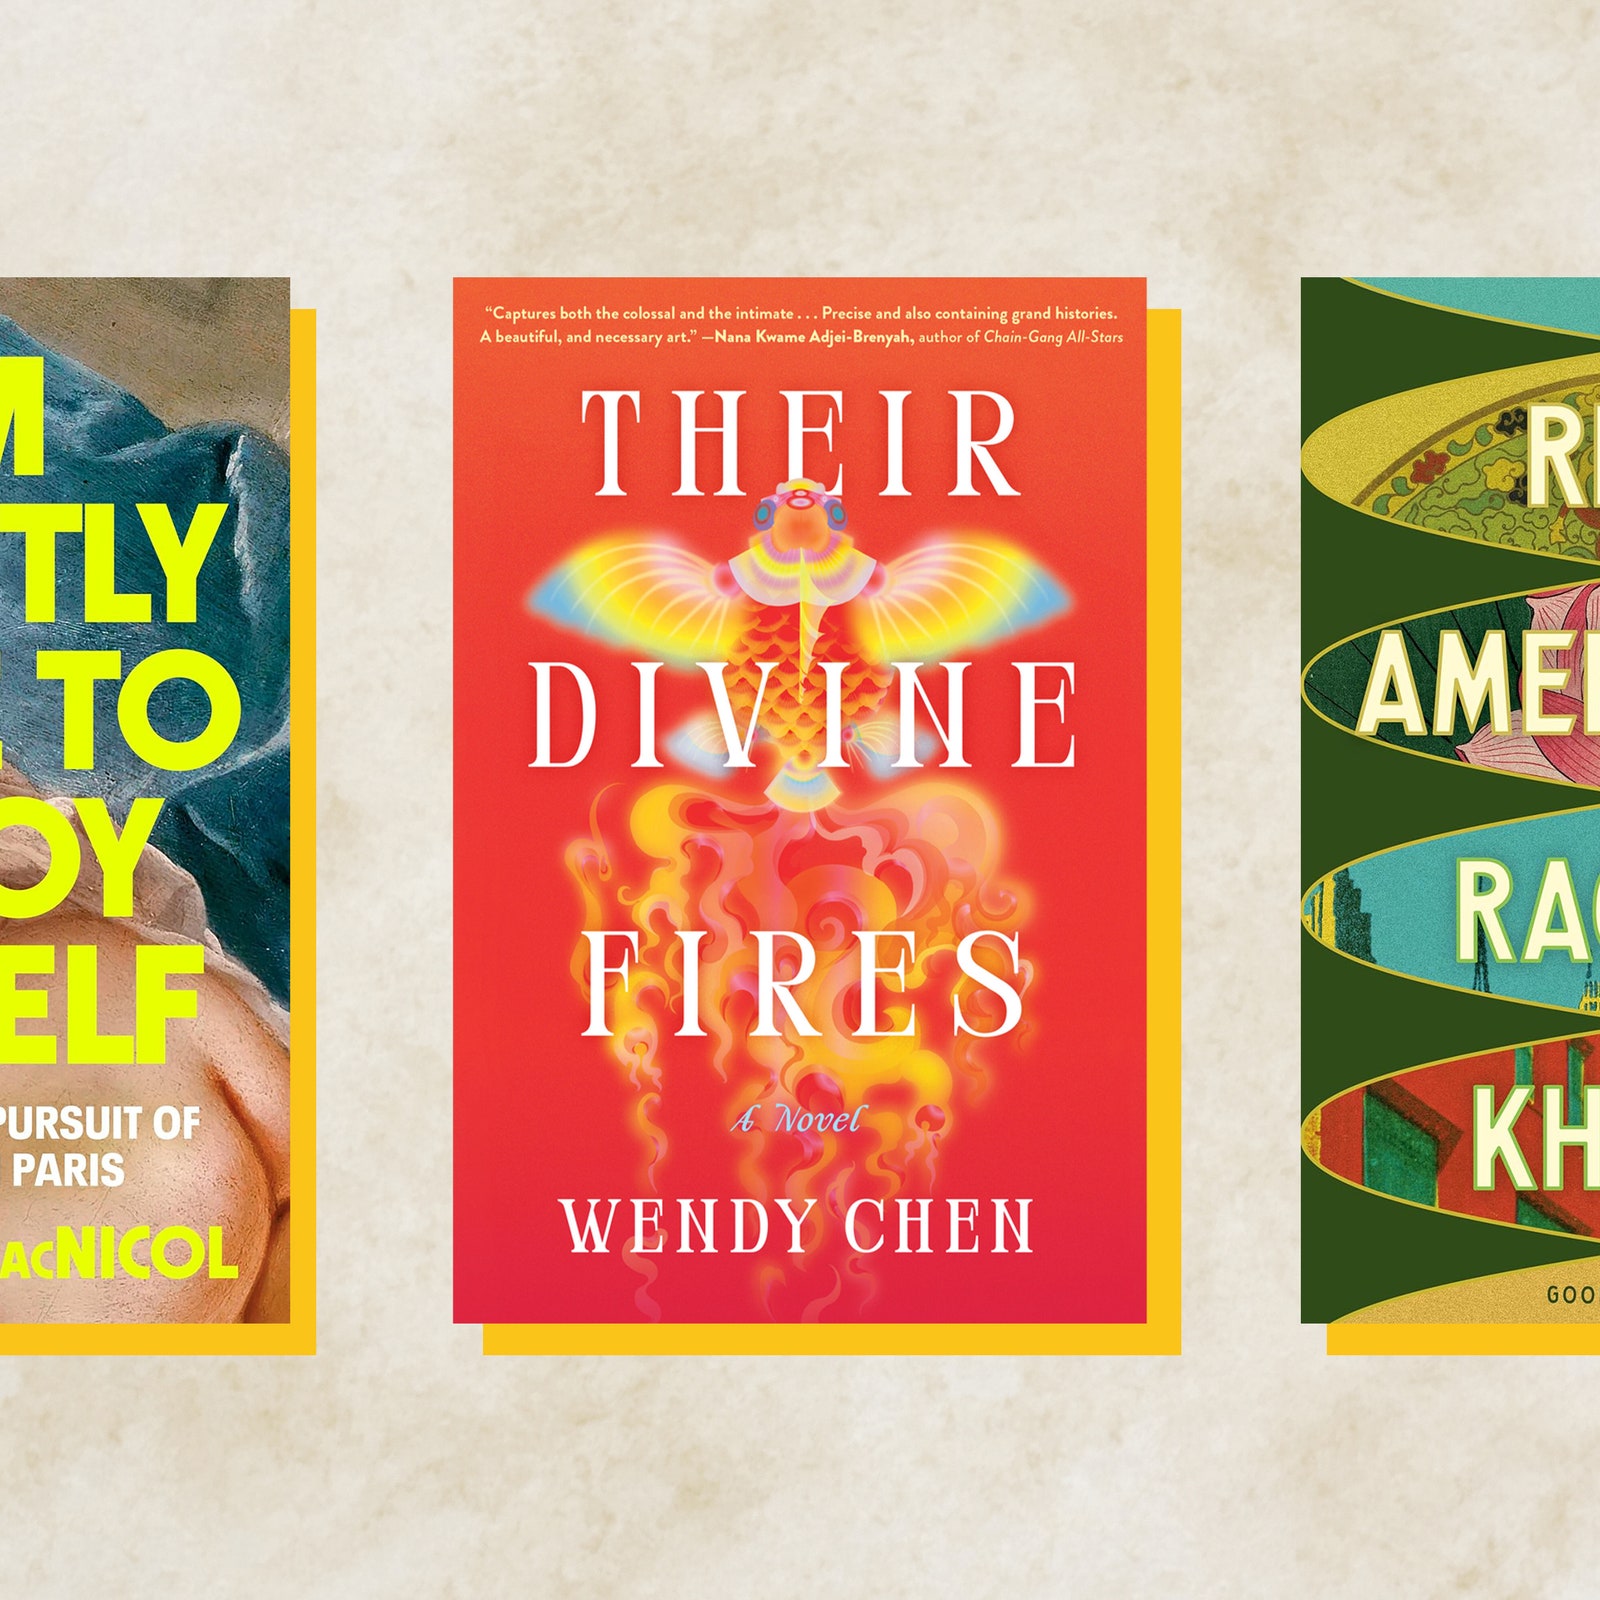 Women Who Travel Book Club: 13 New Books for Your Summer Reading List